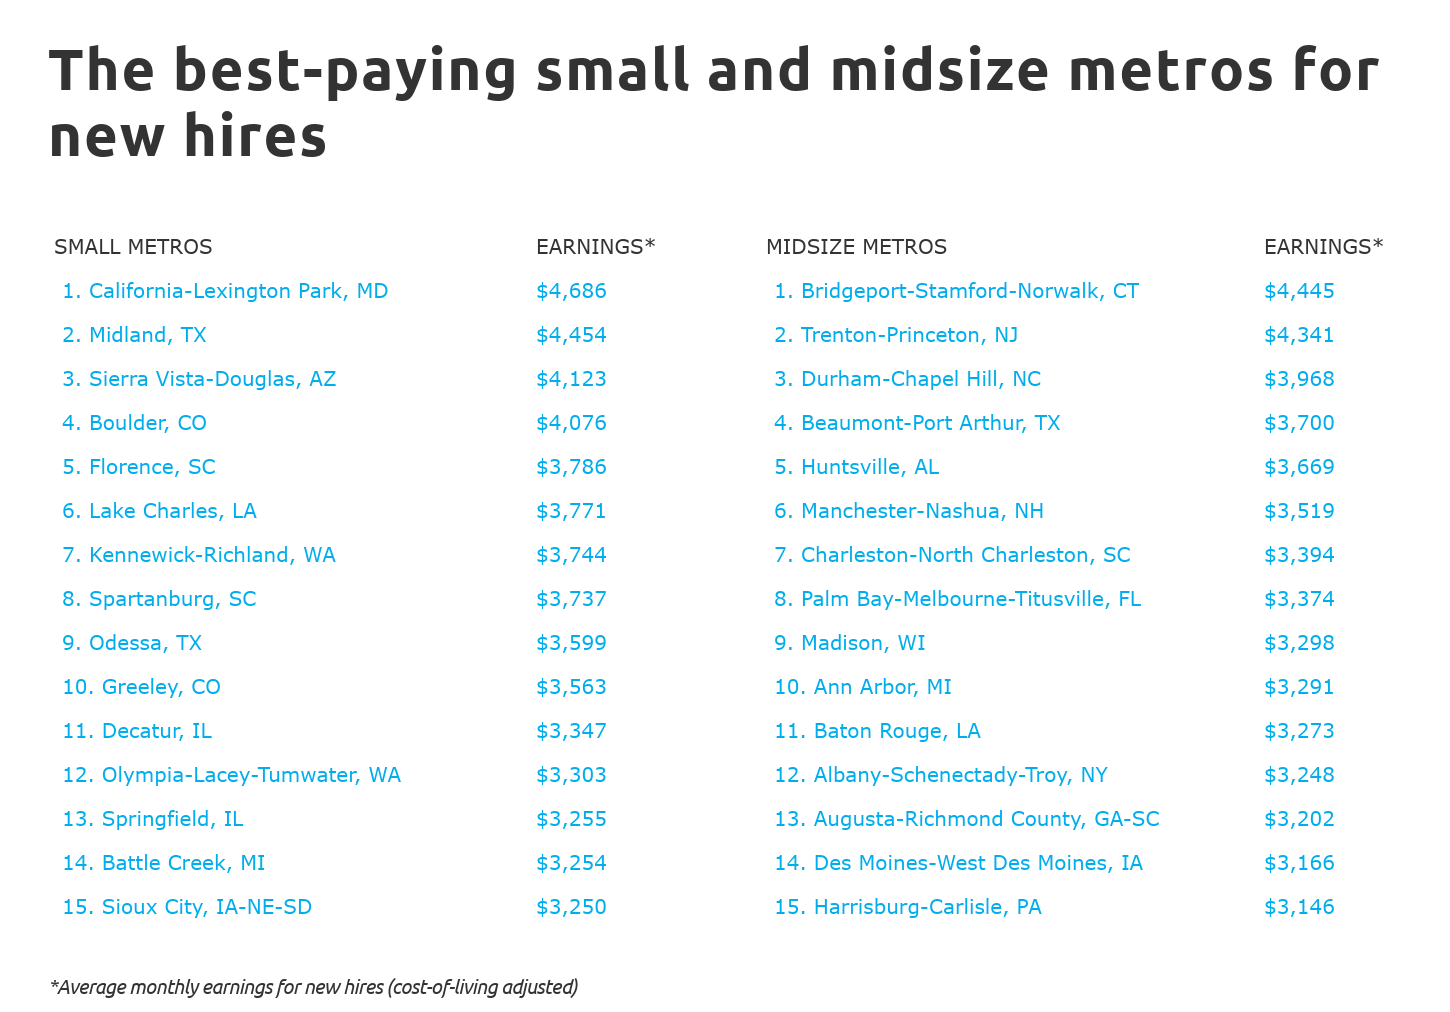 The best-paying small and midsize metros for new hires